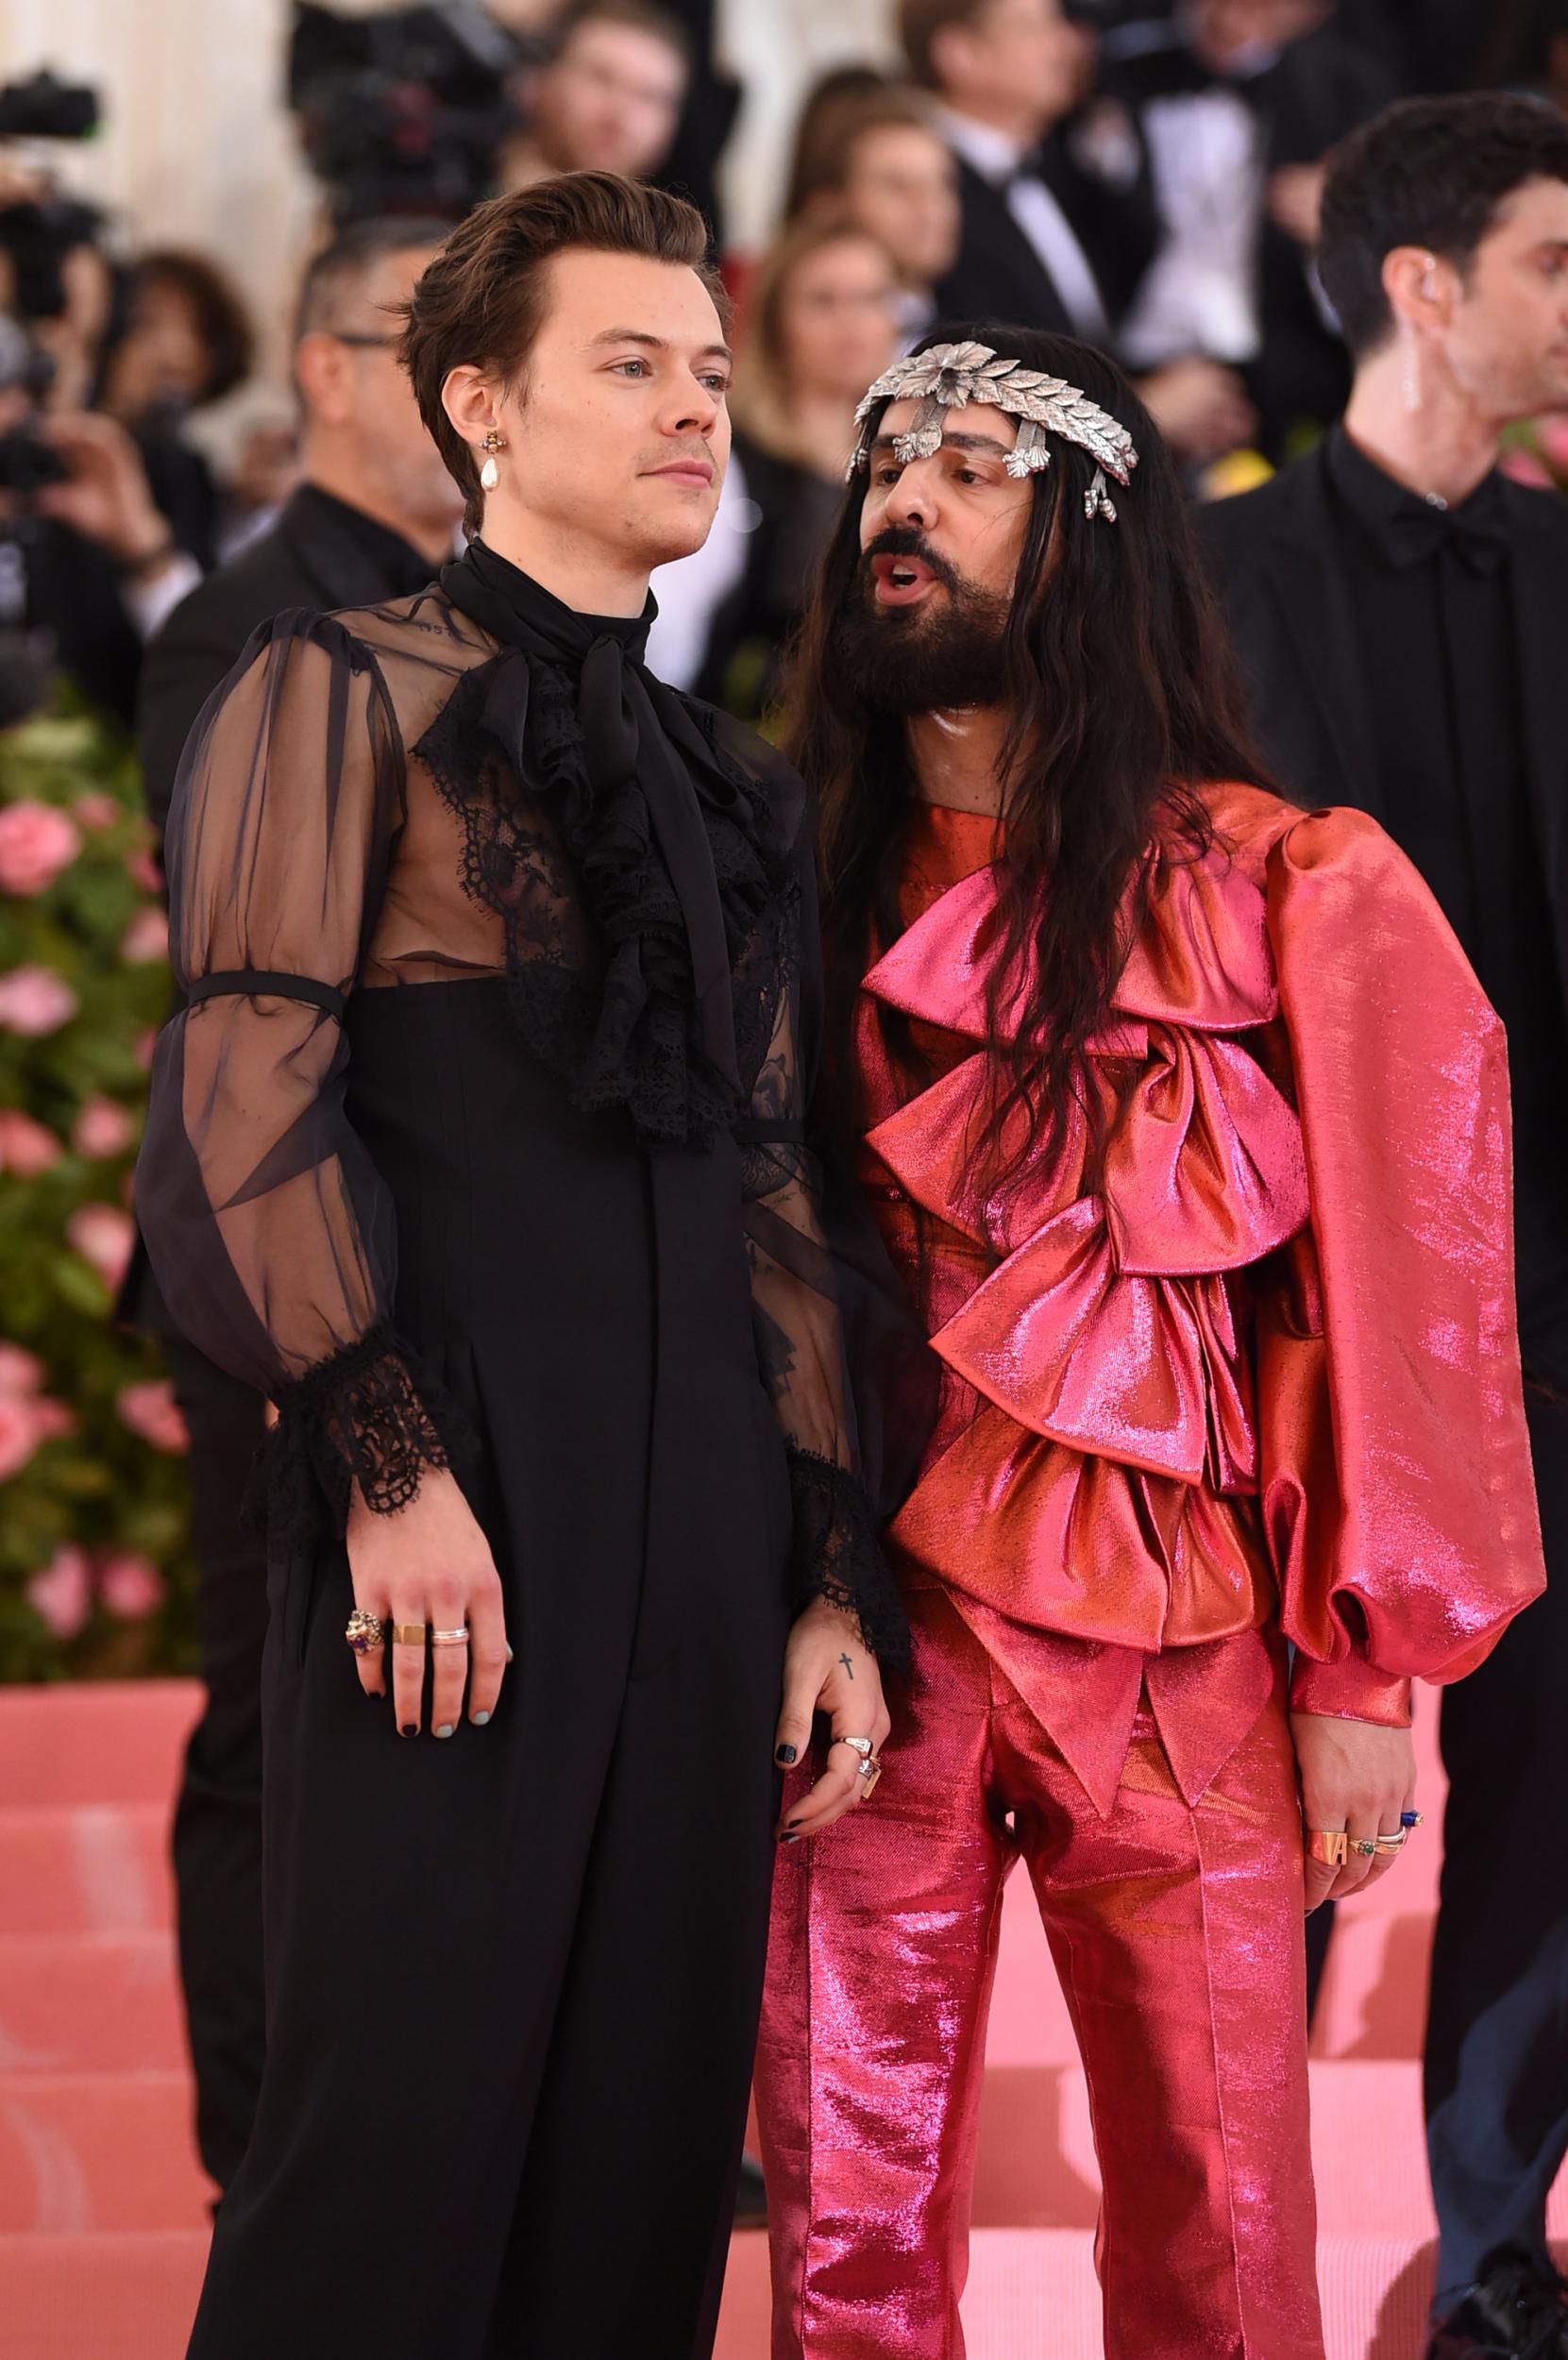 Harry Styles attends Met Gala 2019 with Gucci's creative director Alessandro Michele